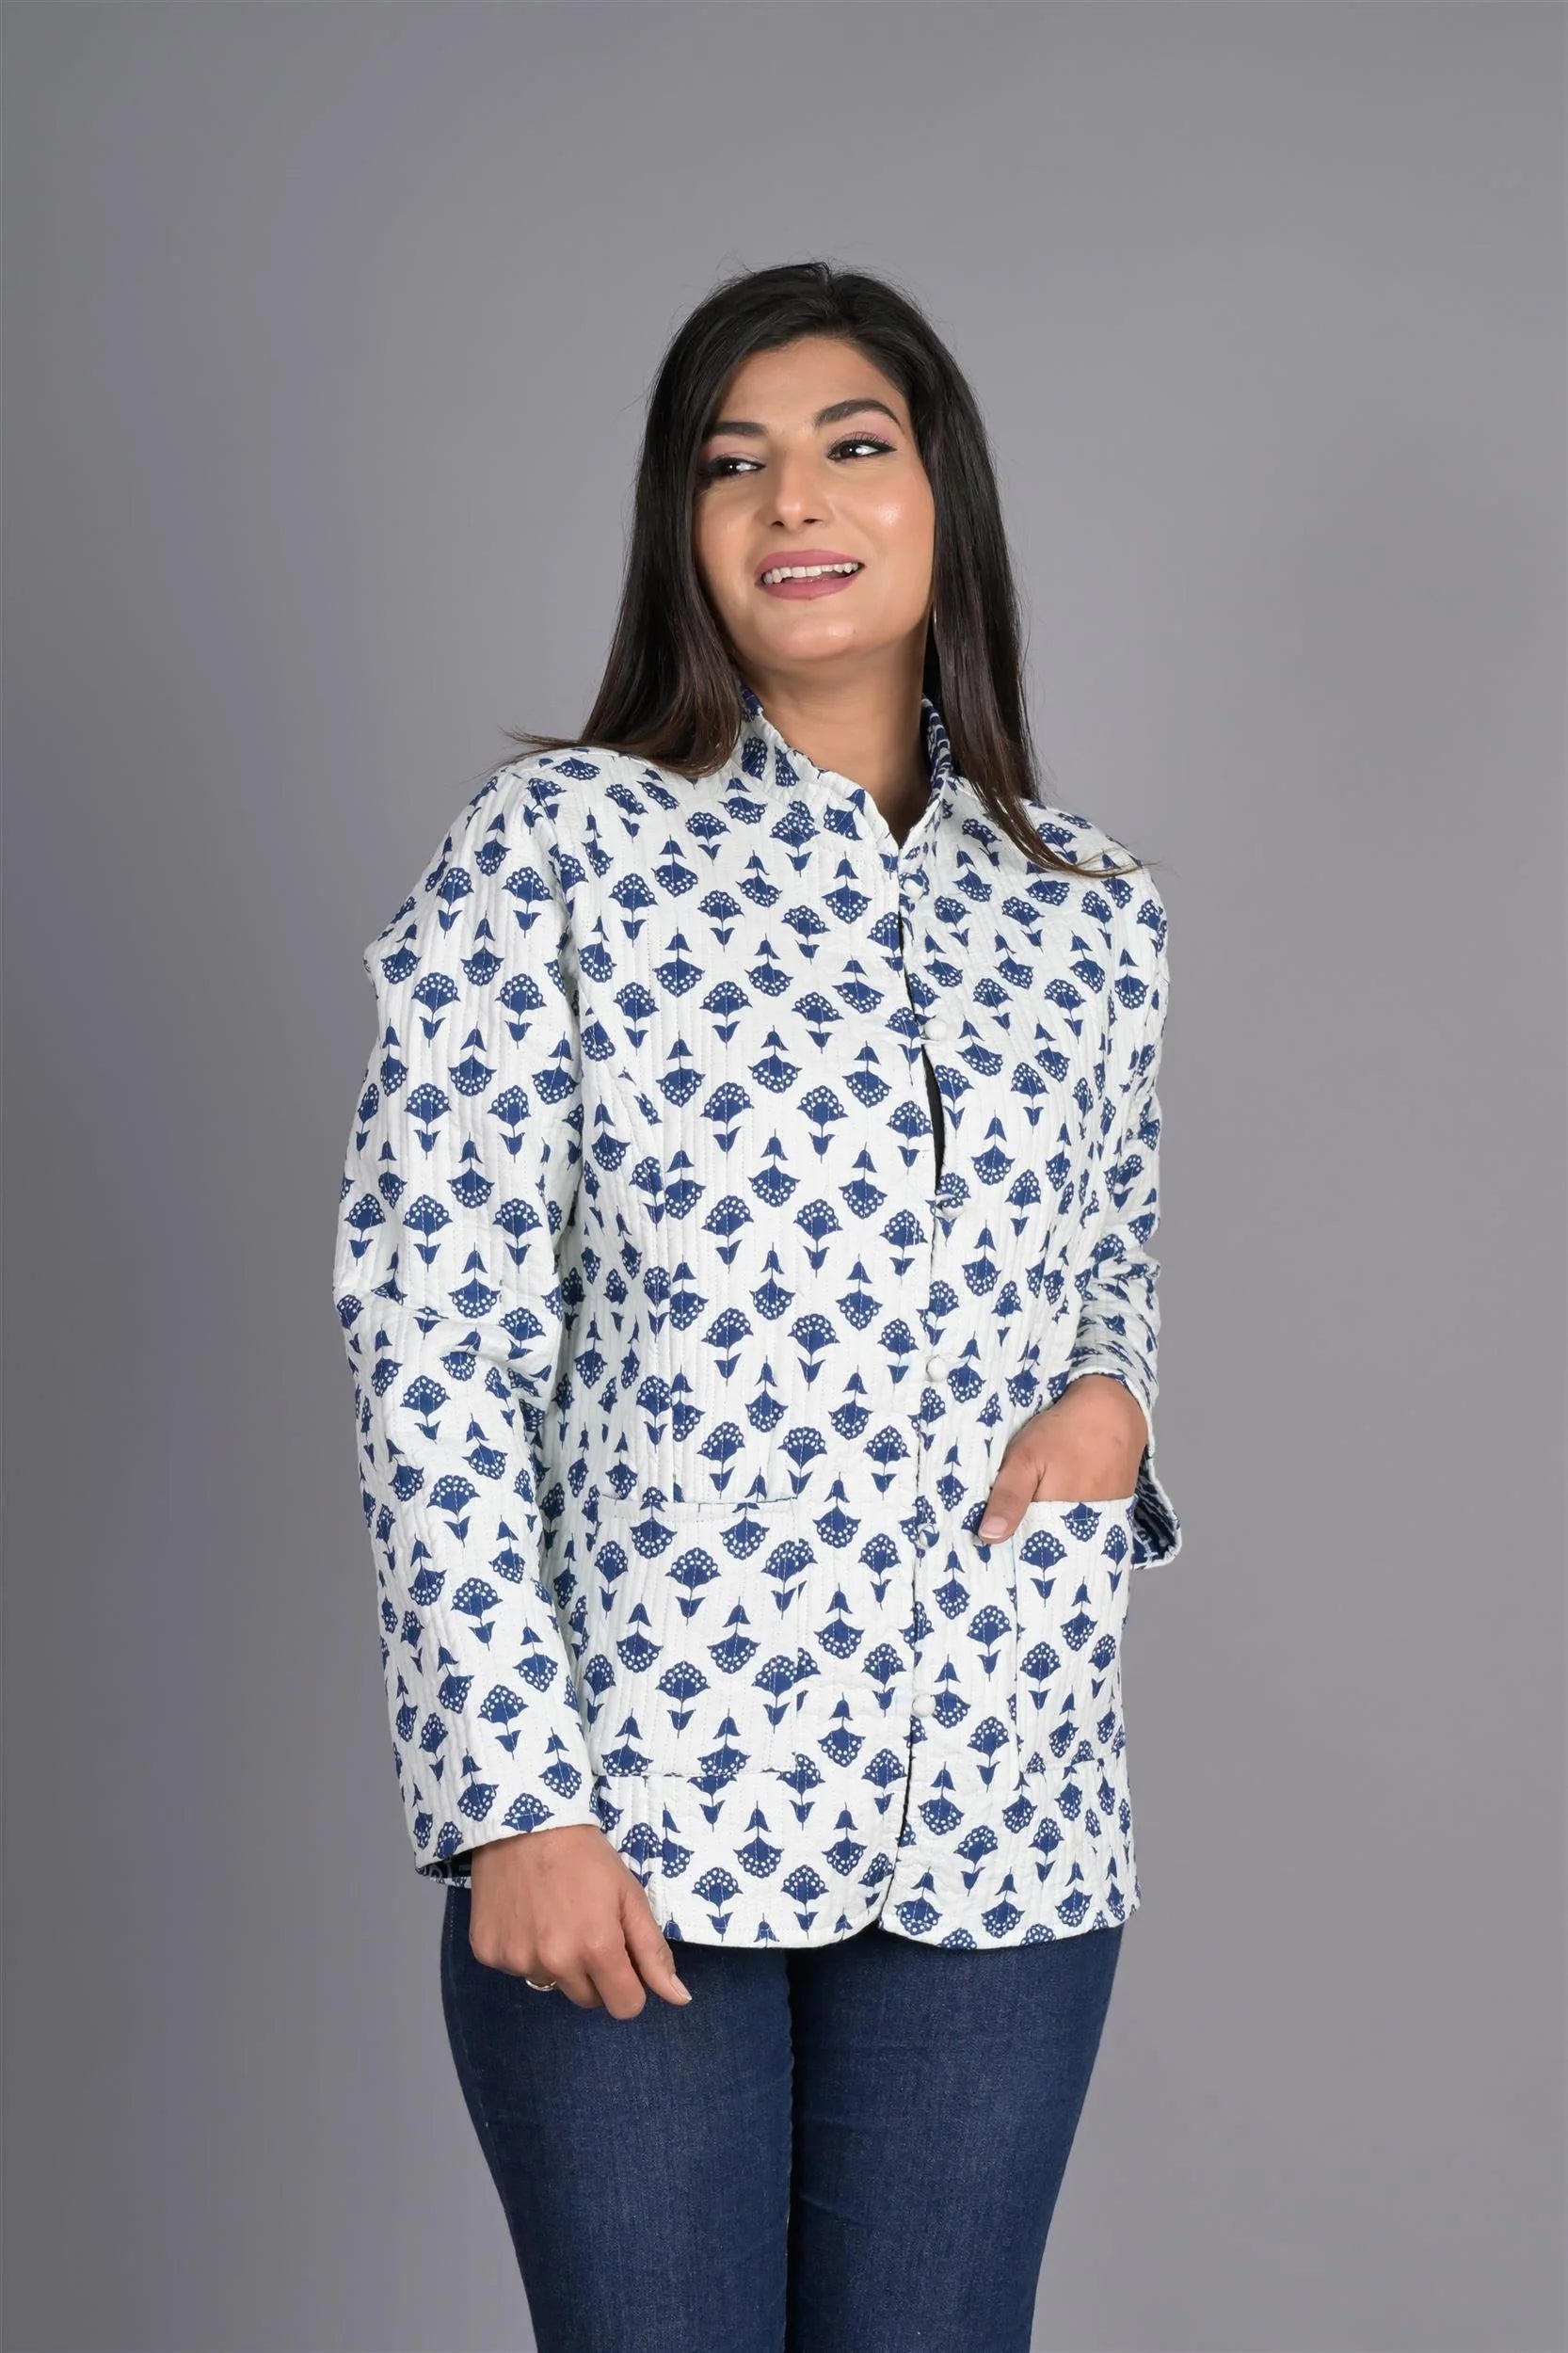 Winter White & Blue Reversible Jaipuri Cotton Quilted Jackets For Women